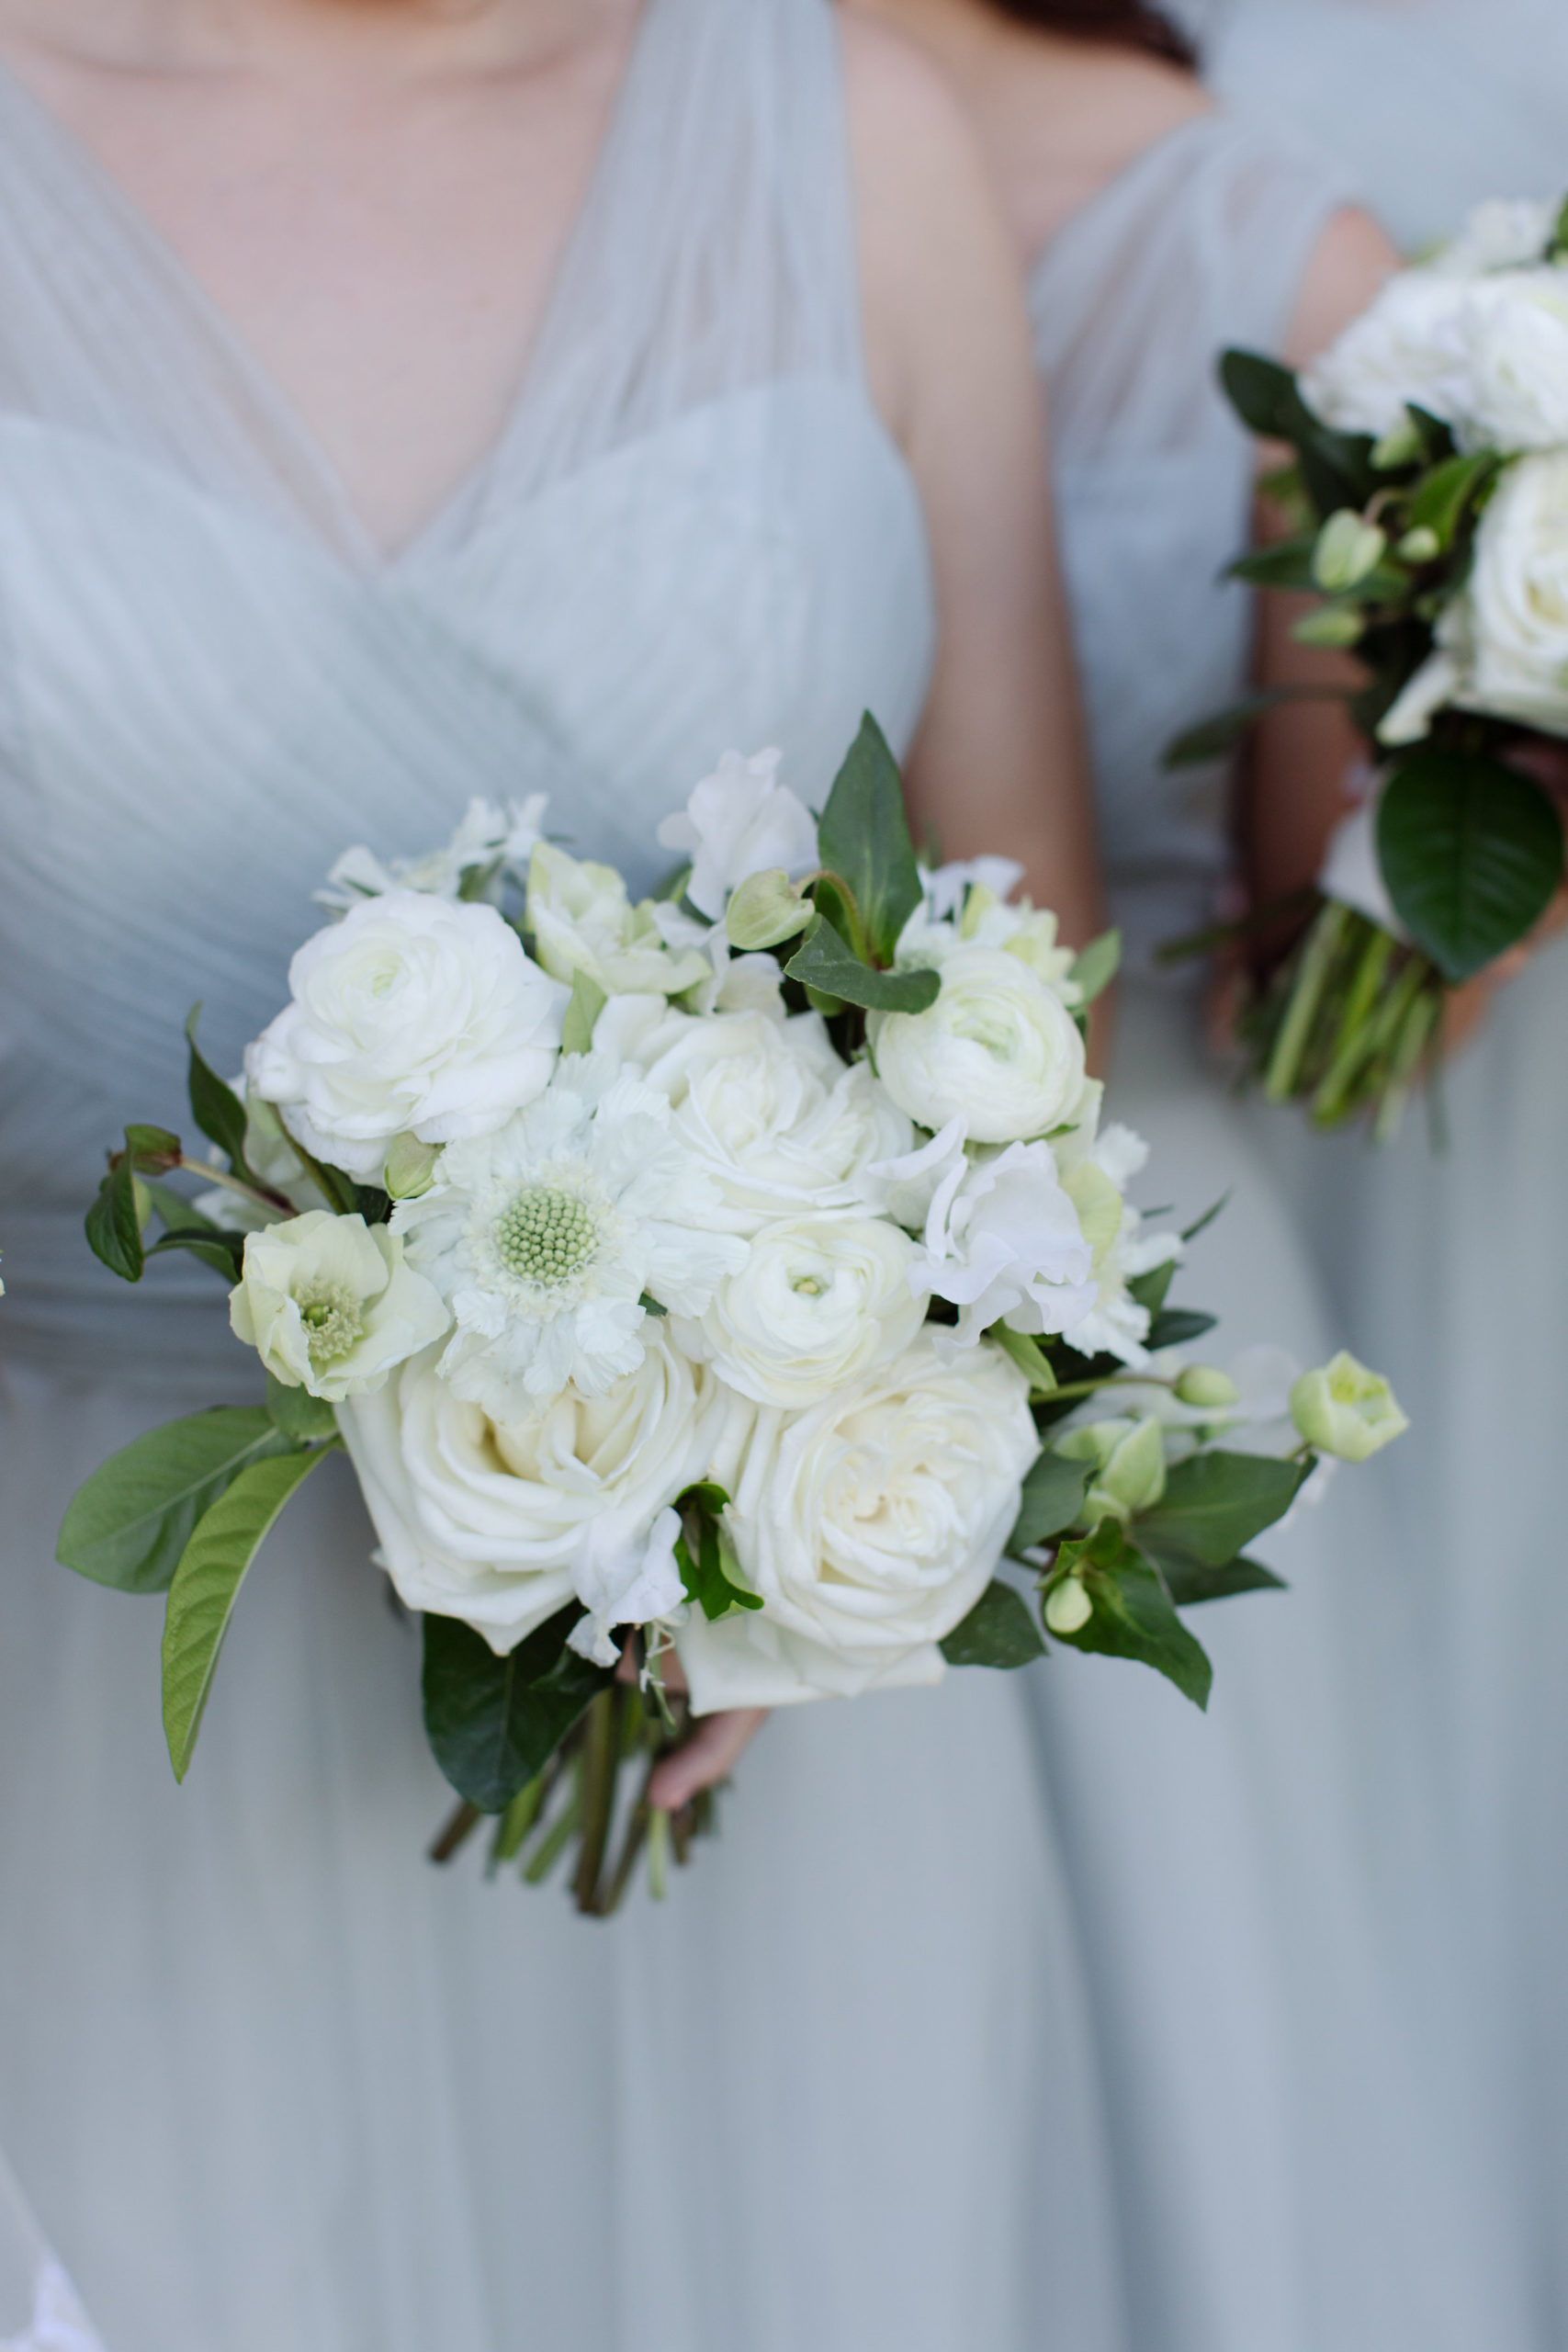 Floral Inspiration - Formal - White &amp; Green - Maybe bridesmaids in black?